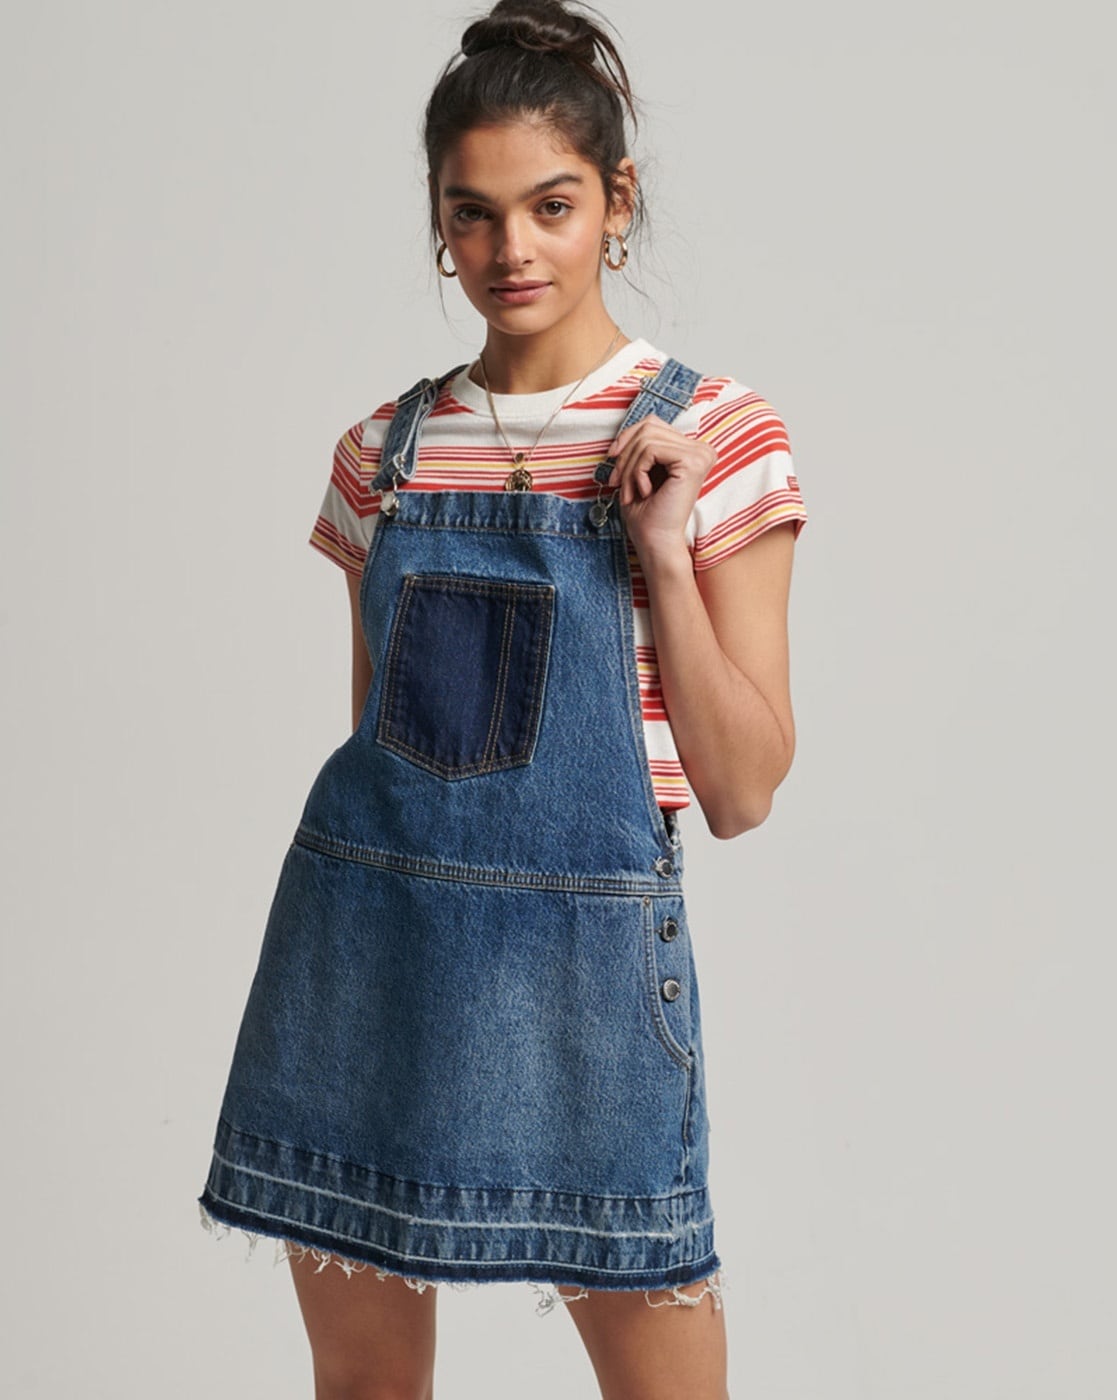 11 of the best Pinafore Dress sewing patterns - Gathered